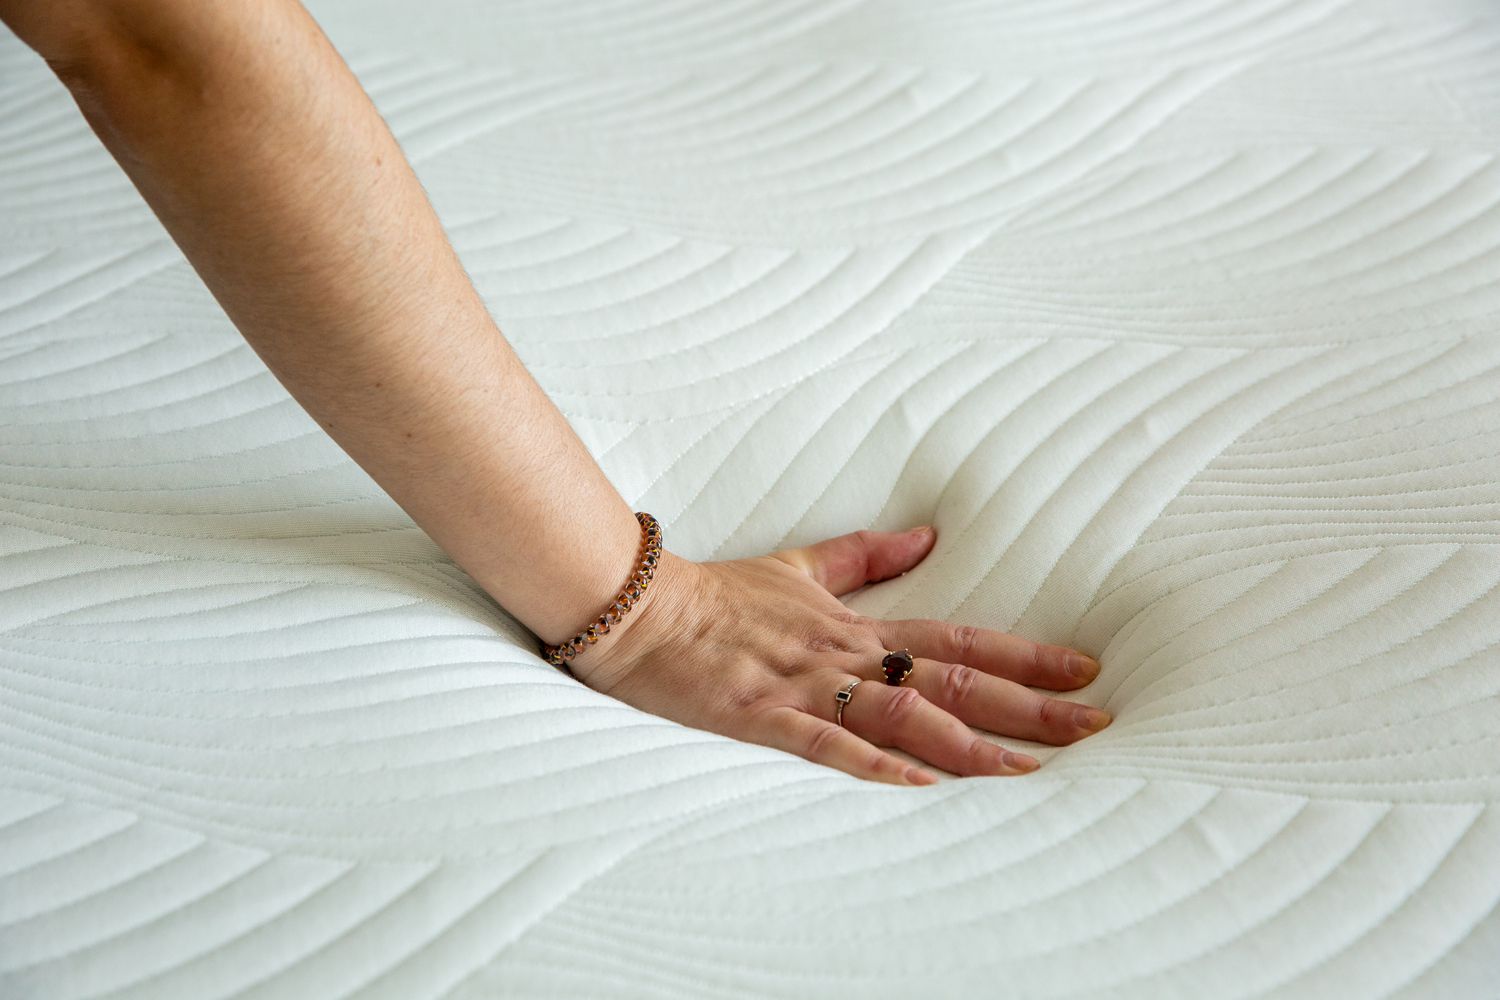 Why is it recommended to choose the best mattress?